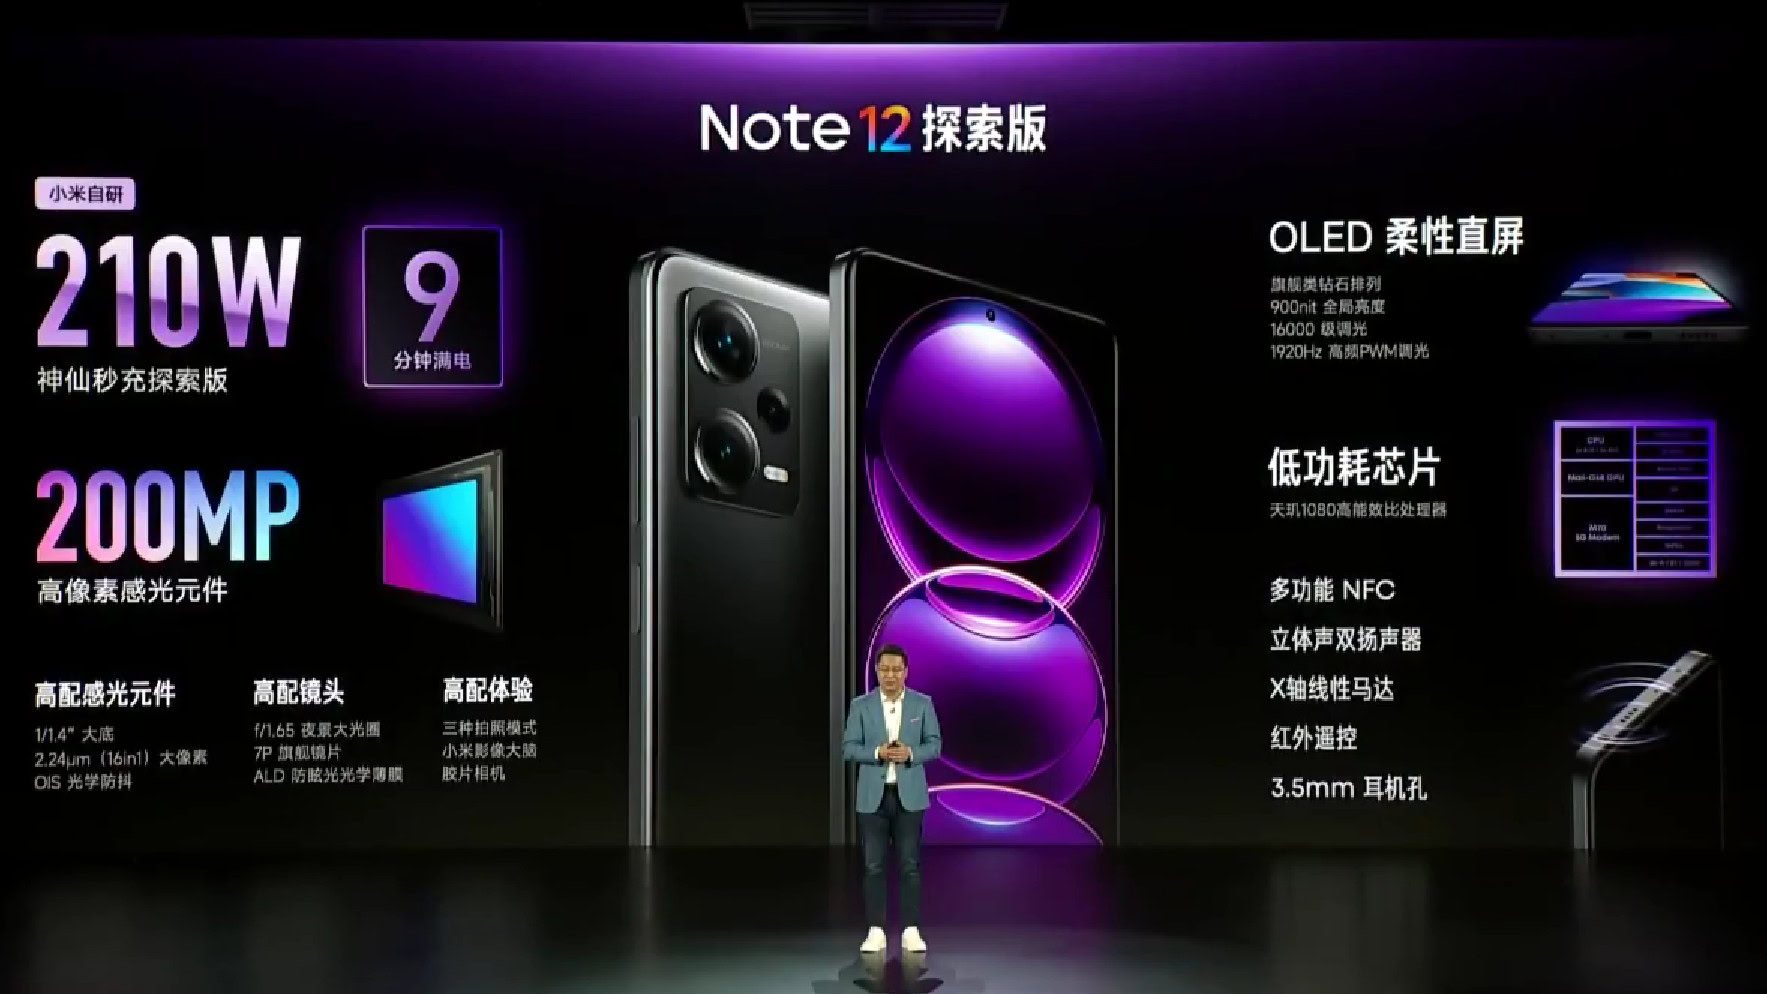 Redmi Note 12 Pro series officially confirmed to arrive with new 200 MP  camera and MediaTek Dimensity 1080 chipset -  News